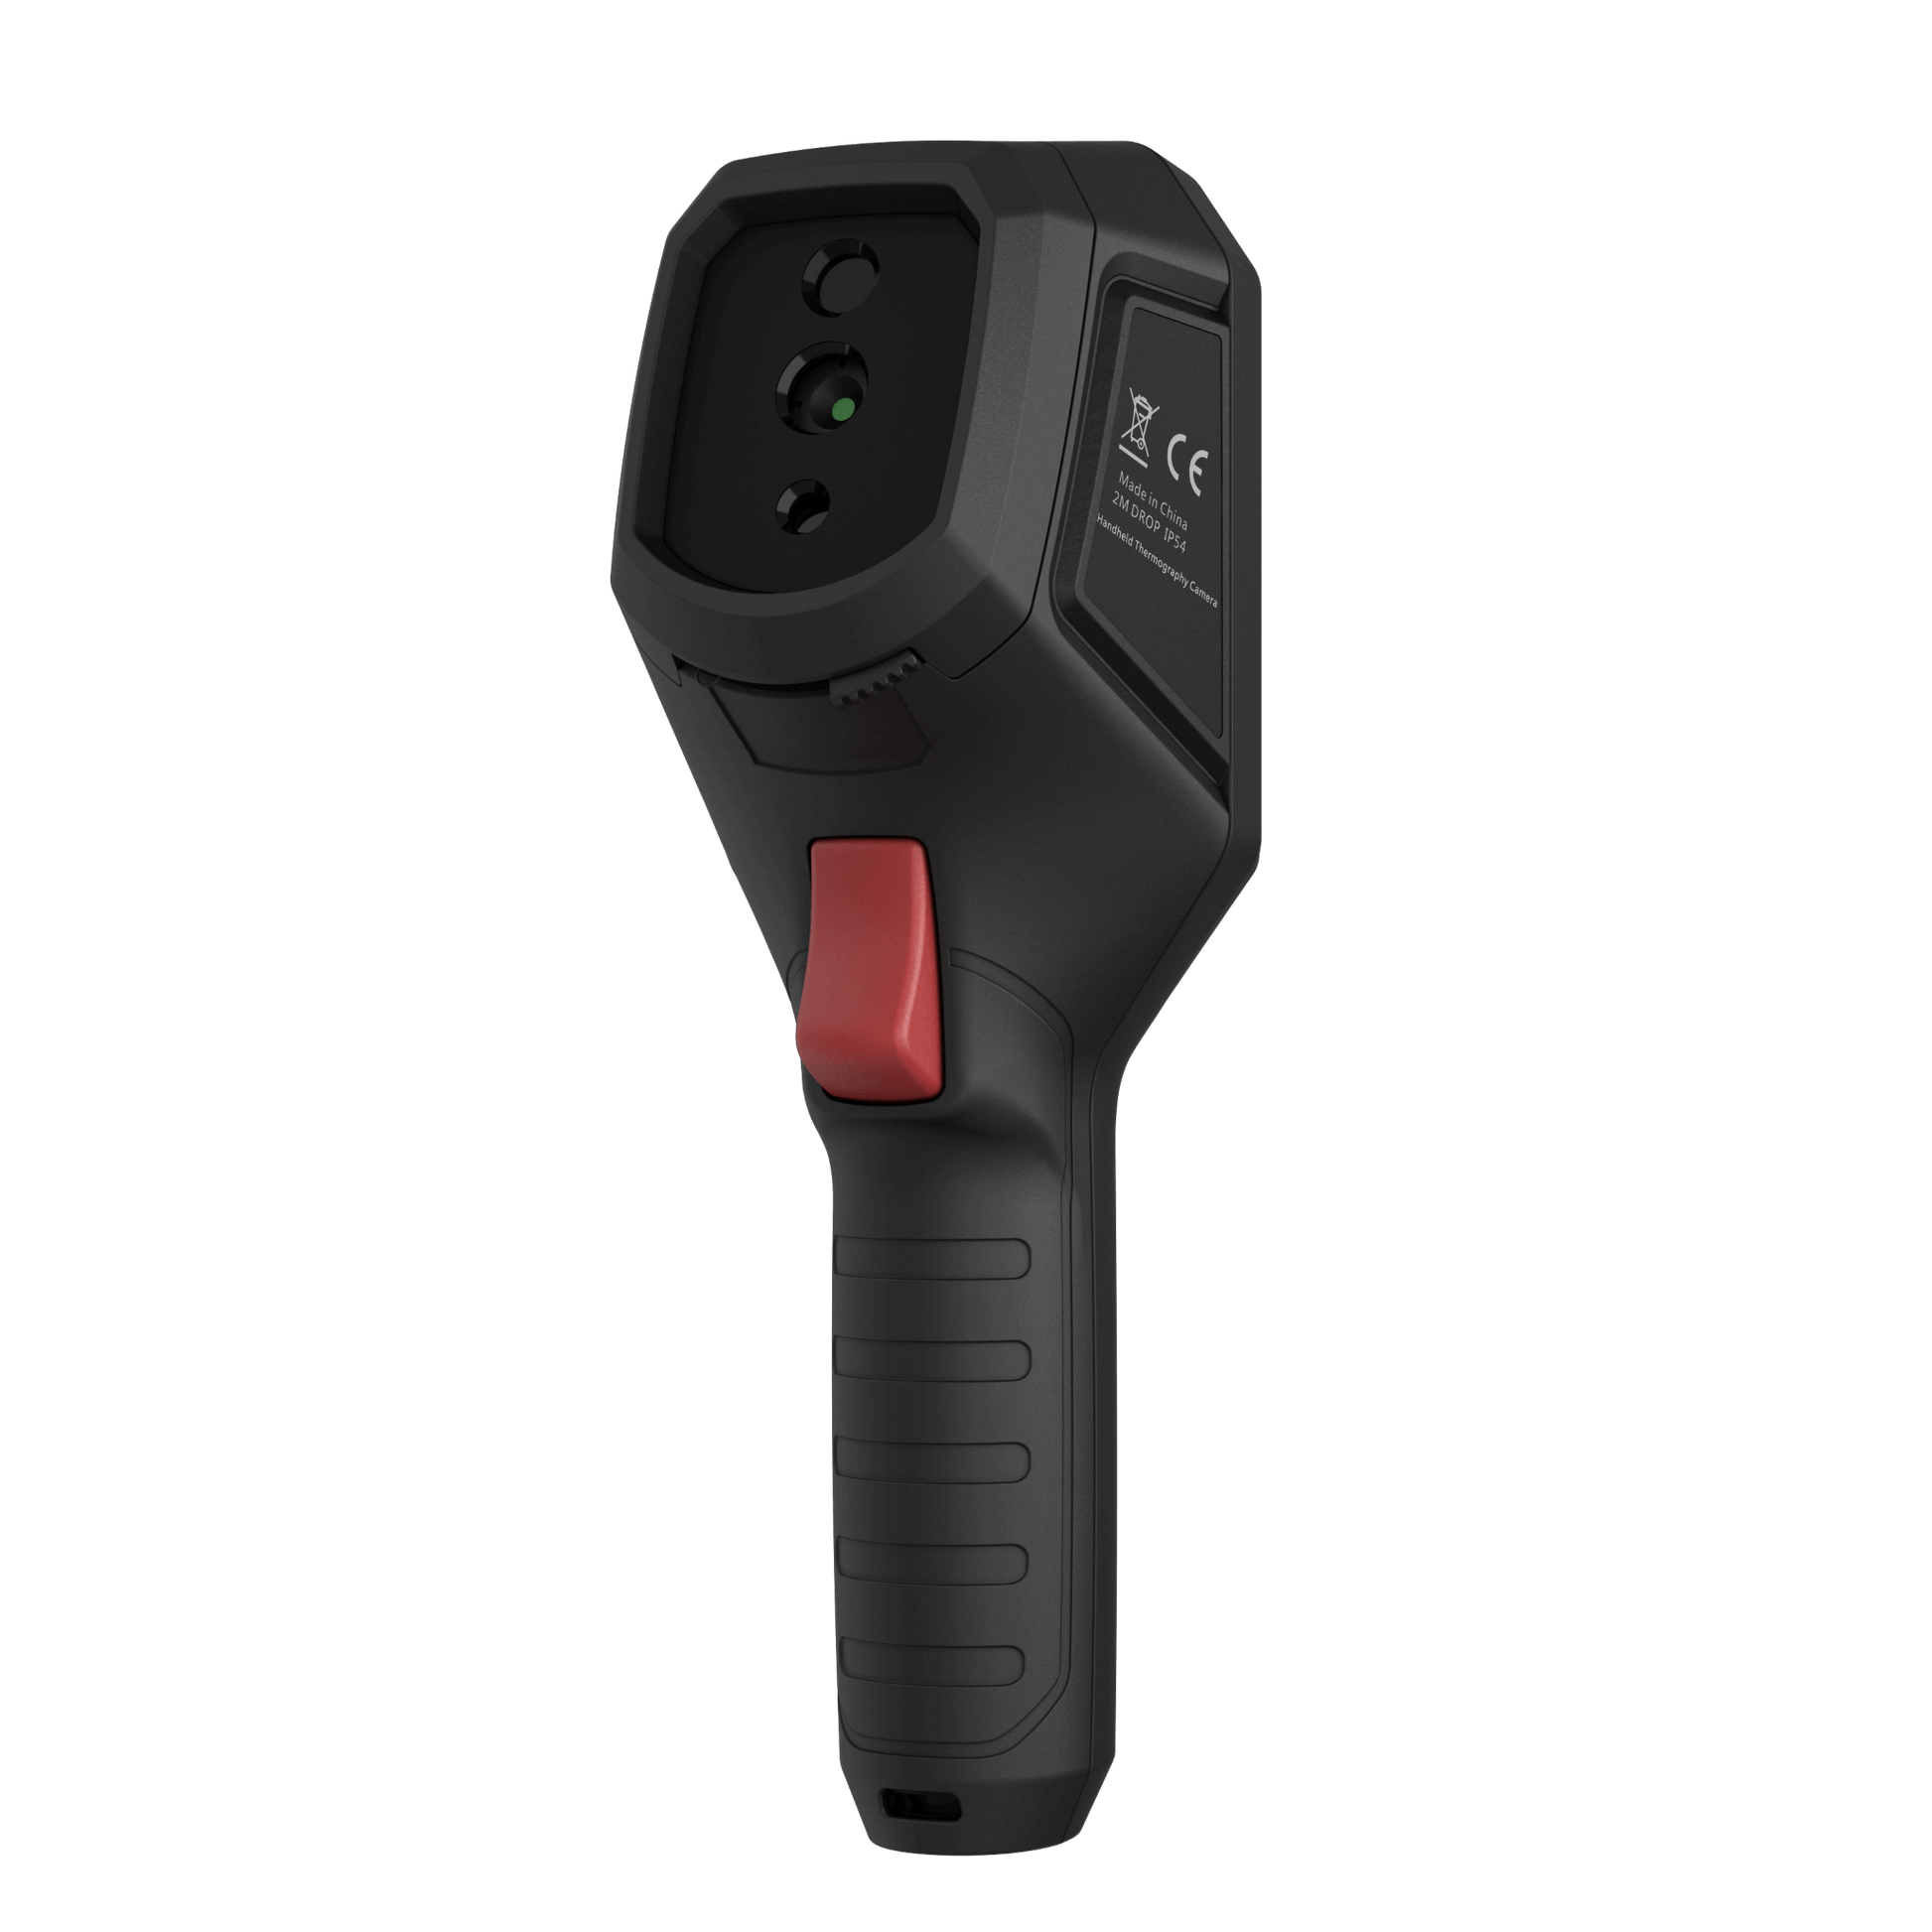 HikMicro B20 Handheld Thermal Imager Front View showing Lenses and Laser Pointer